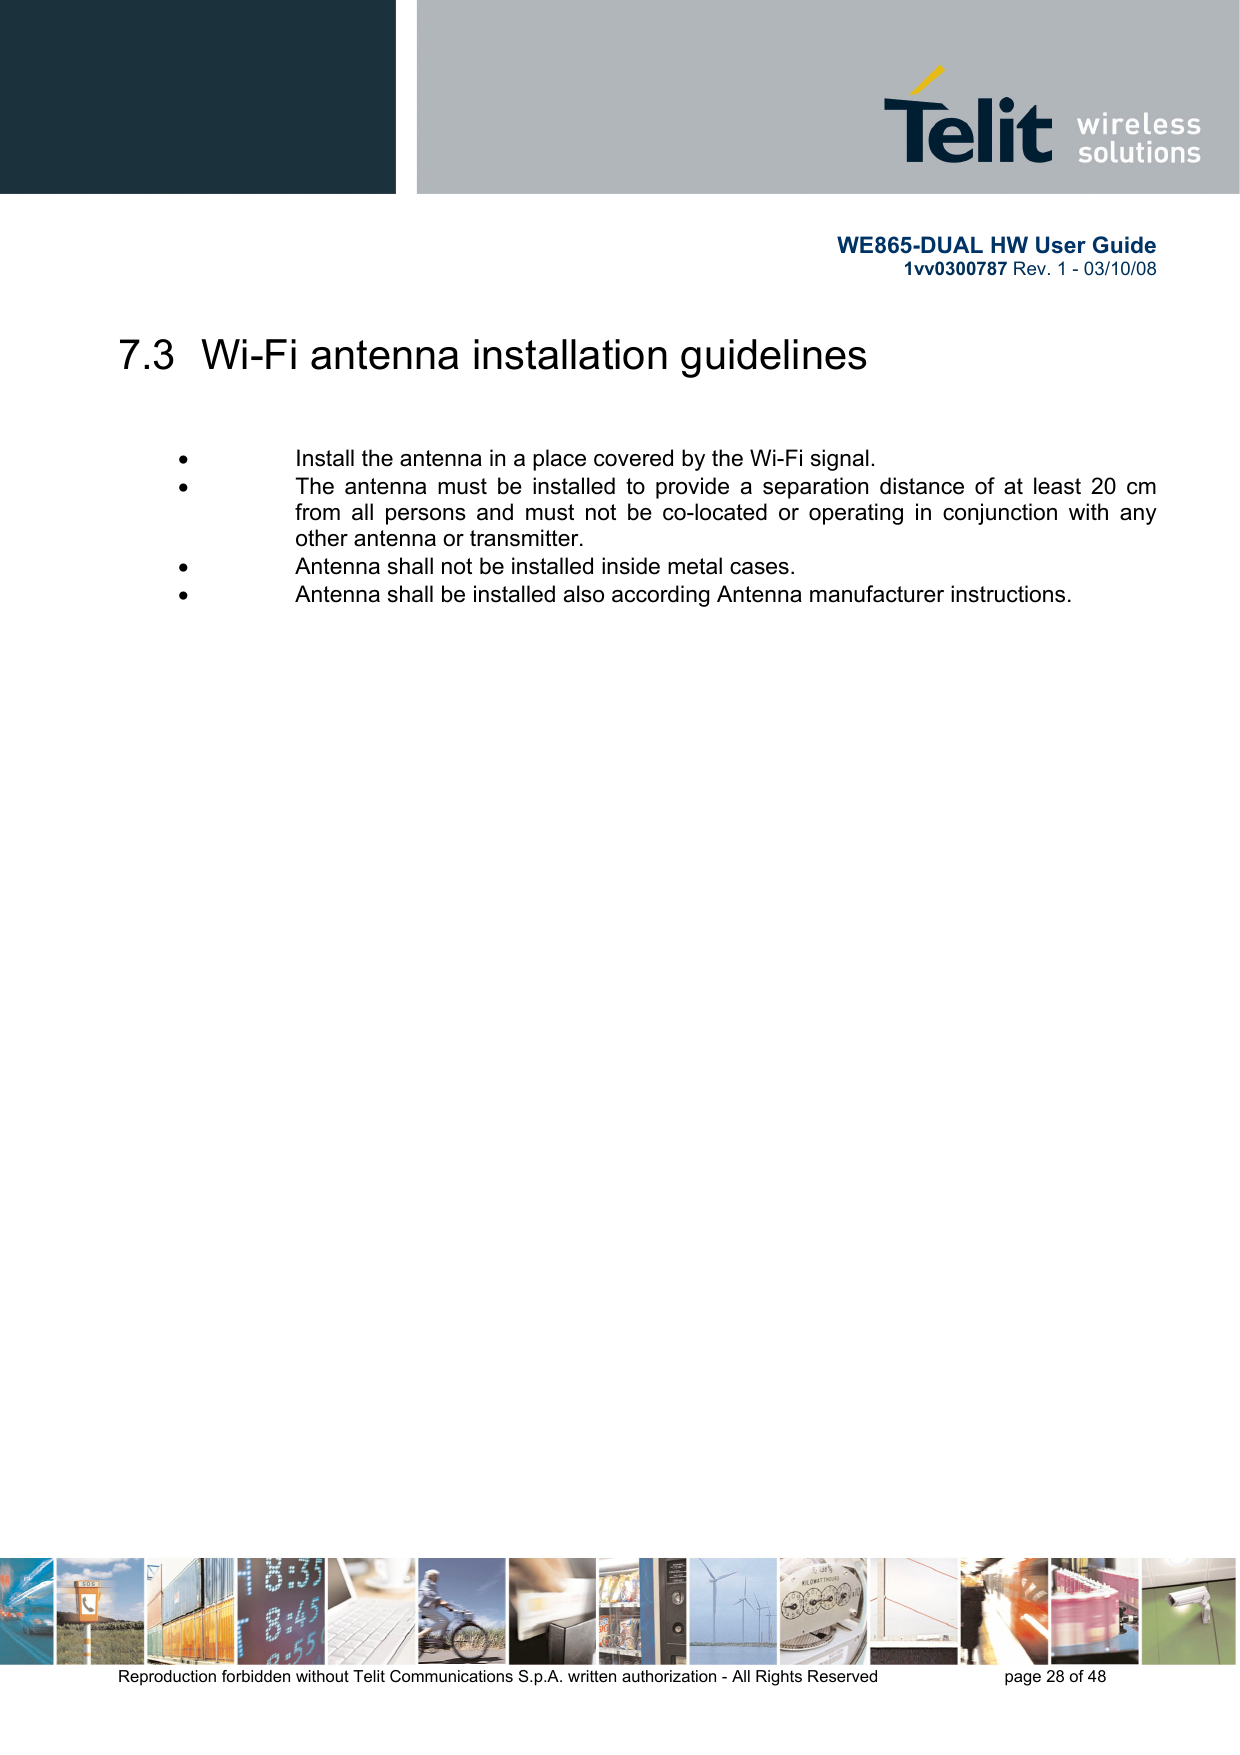       WE865-DUAL HW User Guide 1vv0300787 Rev. 1 - 03/10/08      Reproduction forbidden without Telit Communications S.p.A. written authorization - All Rights Reserved    page 28 of 48  7.3  Wi-Fi antenna installation guidelines   •  Install the antenna in a place covered by the Wi-Fi signal. •  The antenna must be installed to provide a separation distance of at least 20 cm from all persons and must not be co-located or operating in conjunction with any other antenna or transmitter. •  Antenna shall not be installed inside metal cases. •  Antenna shall be installed also according Antenna manufacturer instructions.       